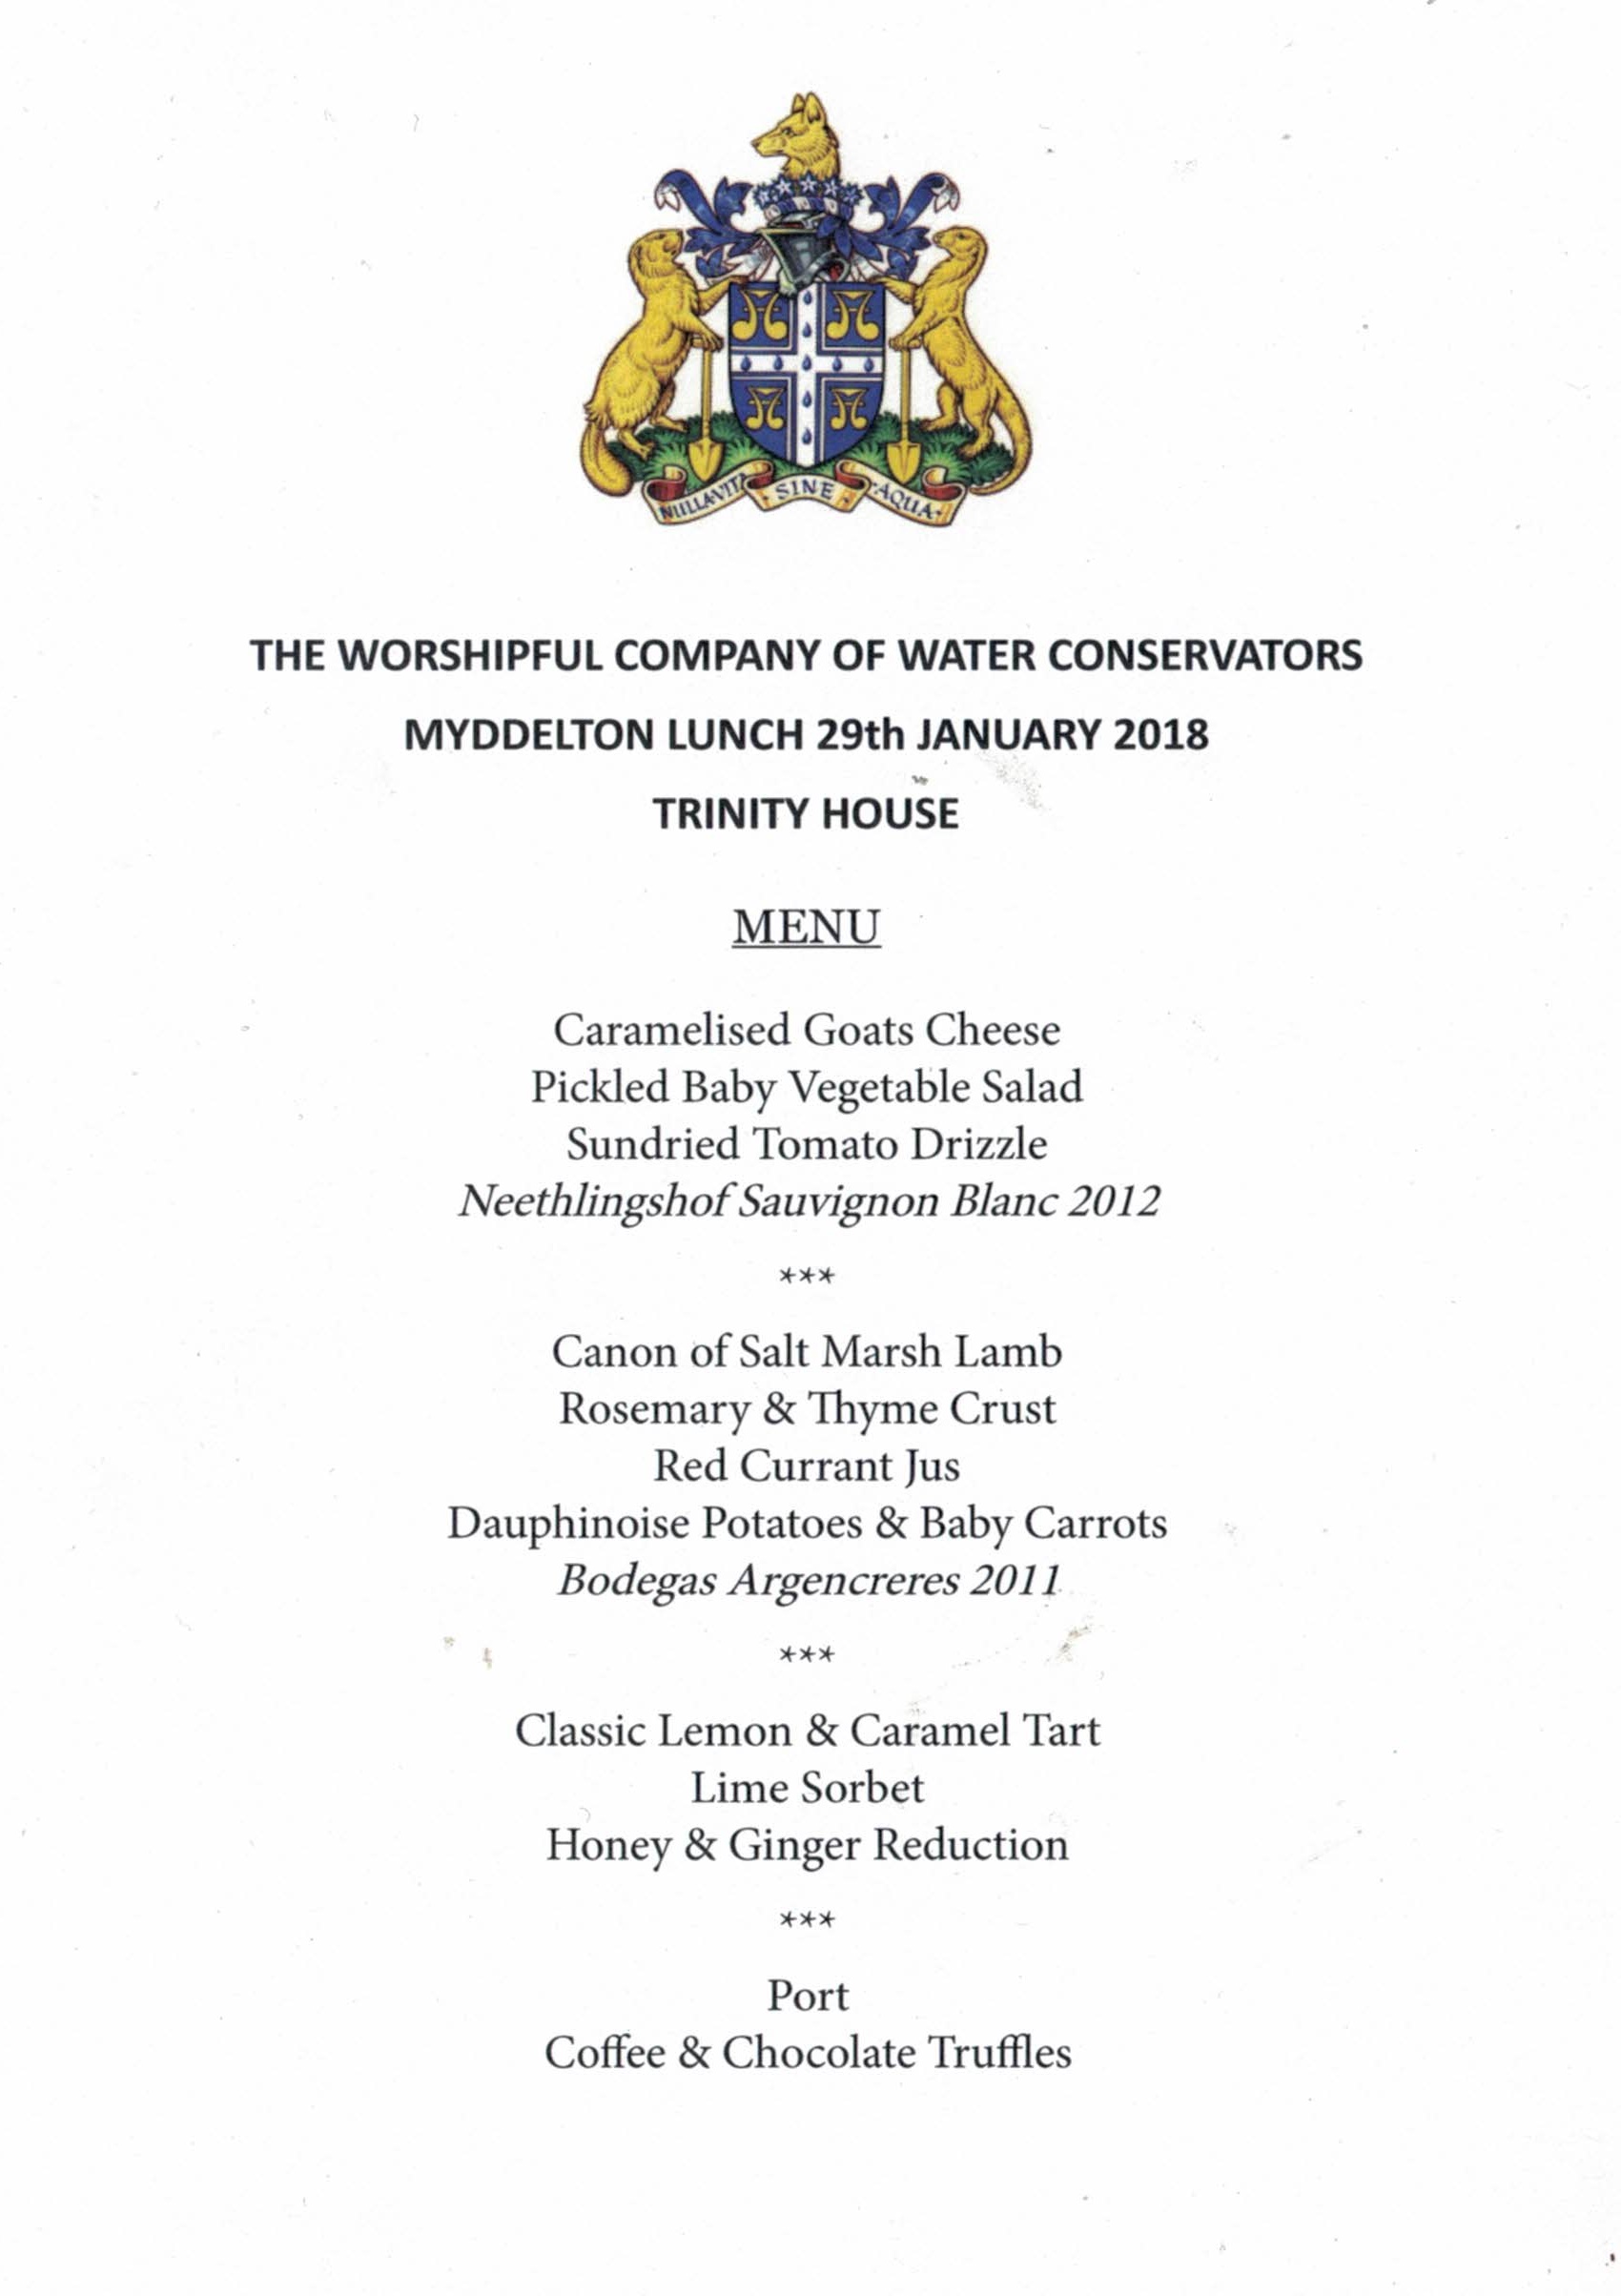 Water Conservators Luncheon at Trinity House - Jan 2018